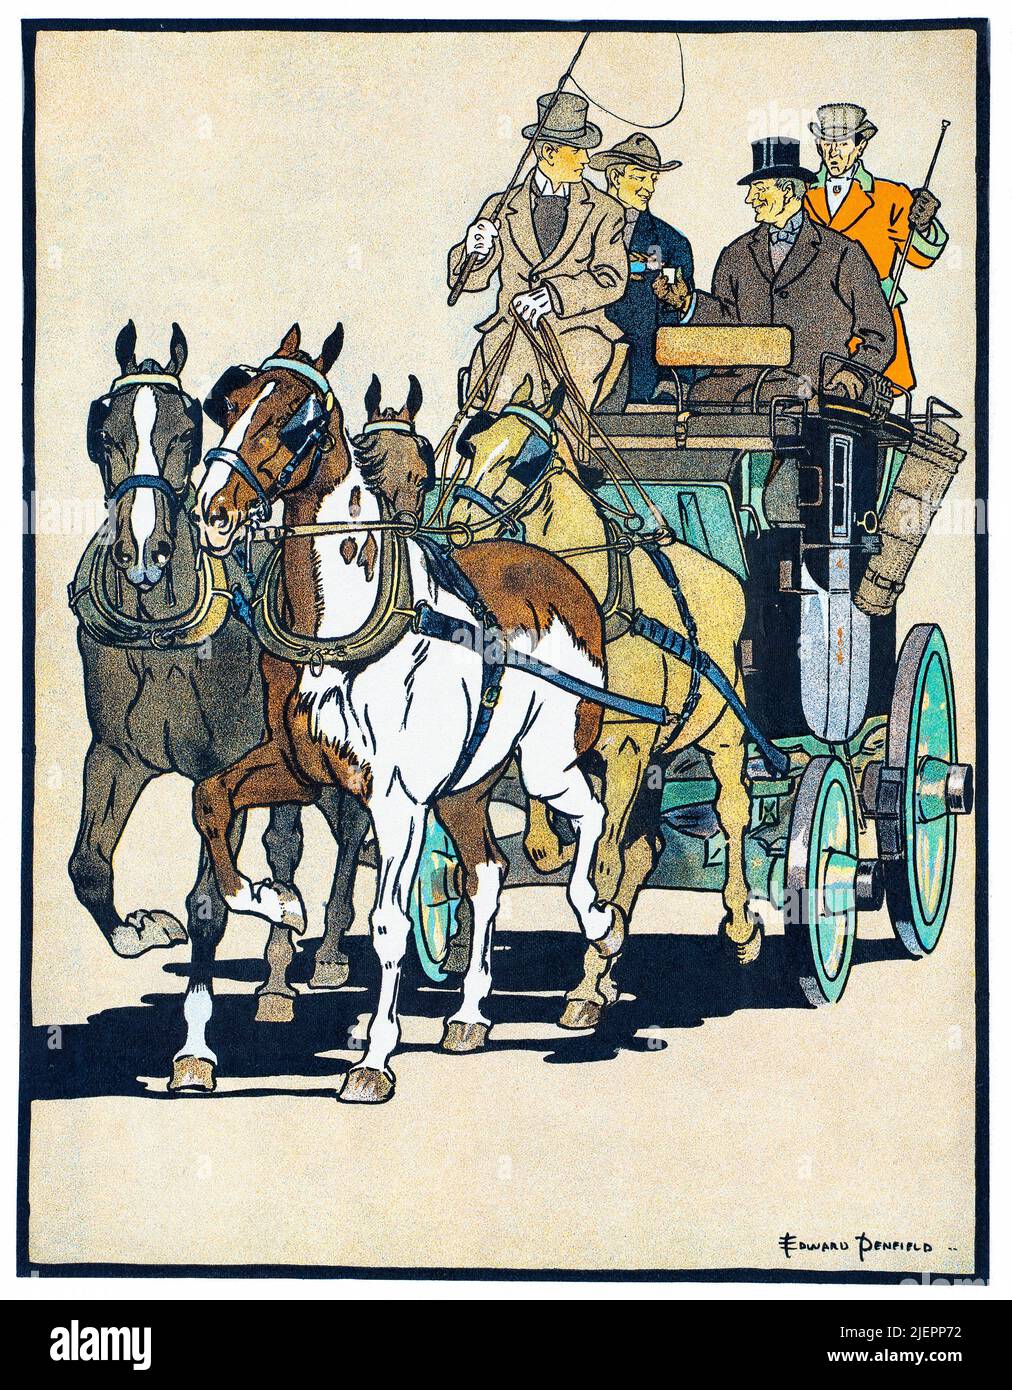 An early 20th century American advertising illustration by Edward Penfield (1866-1925) for John Dewer & Sons Ltd, Whisky distillers in Perth, Scotland Stock Photo